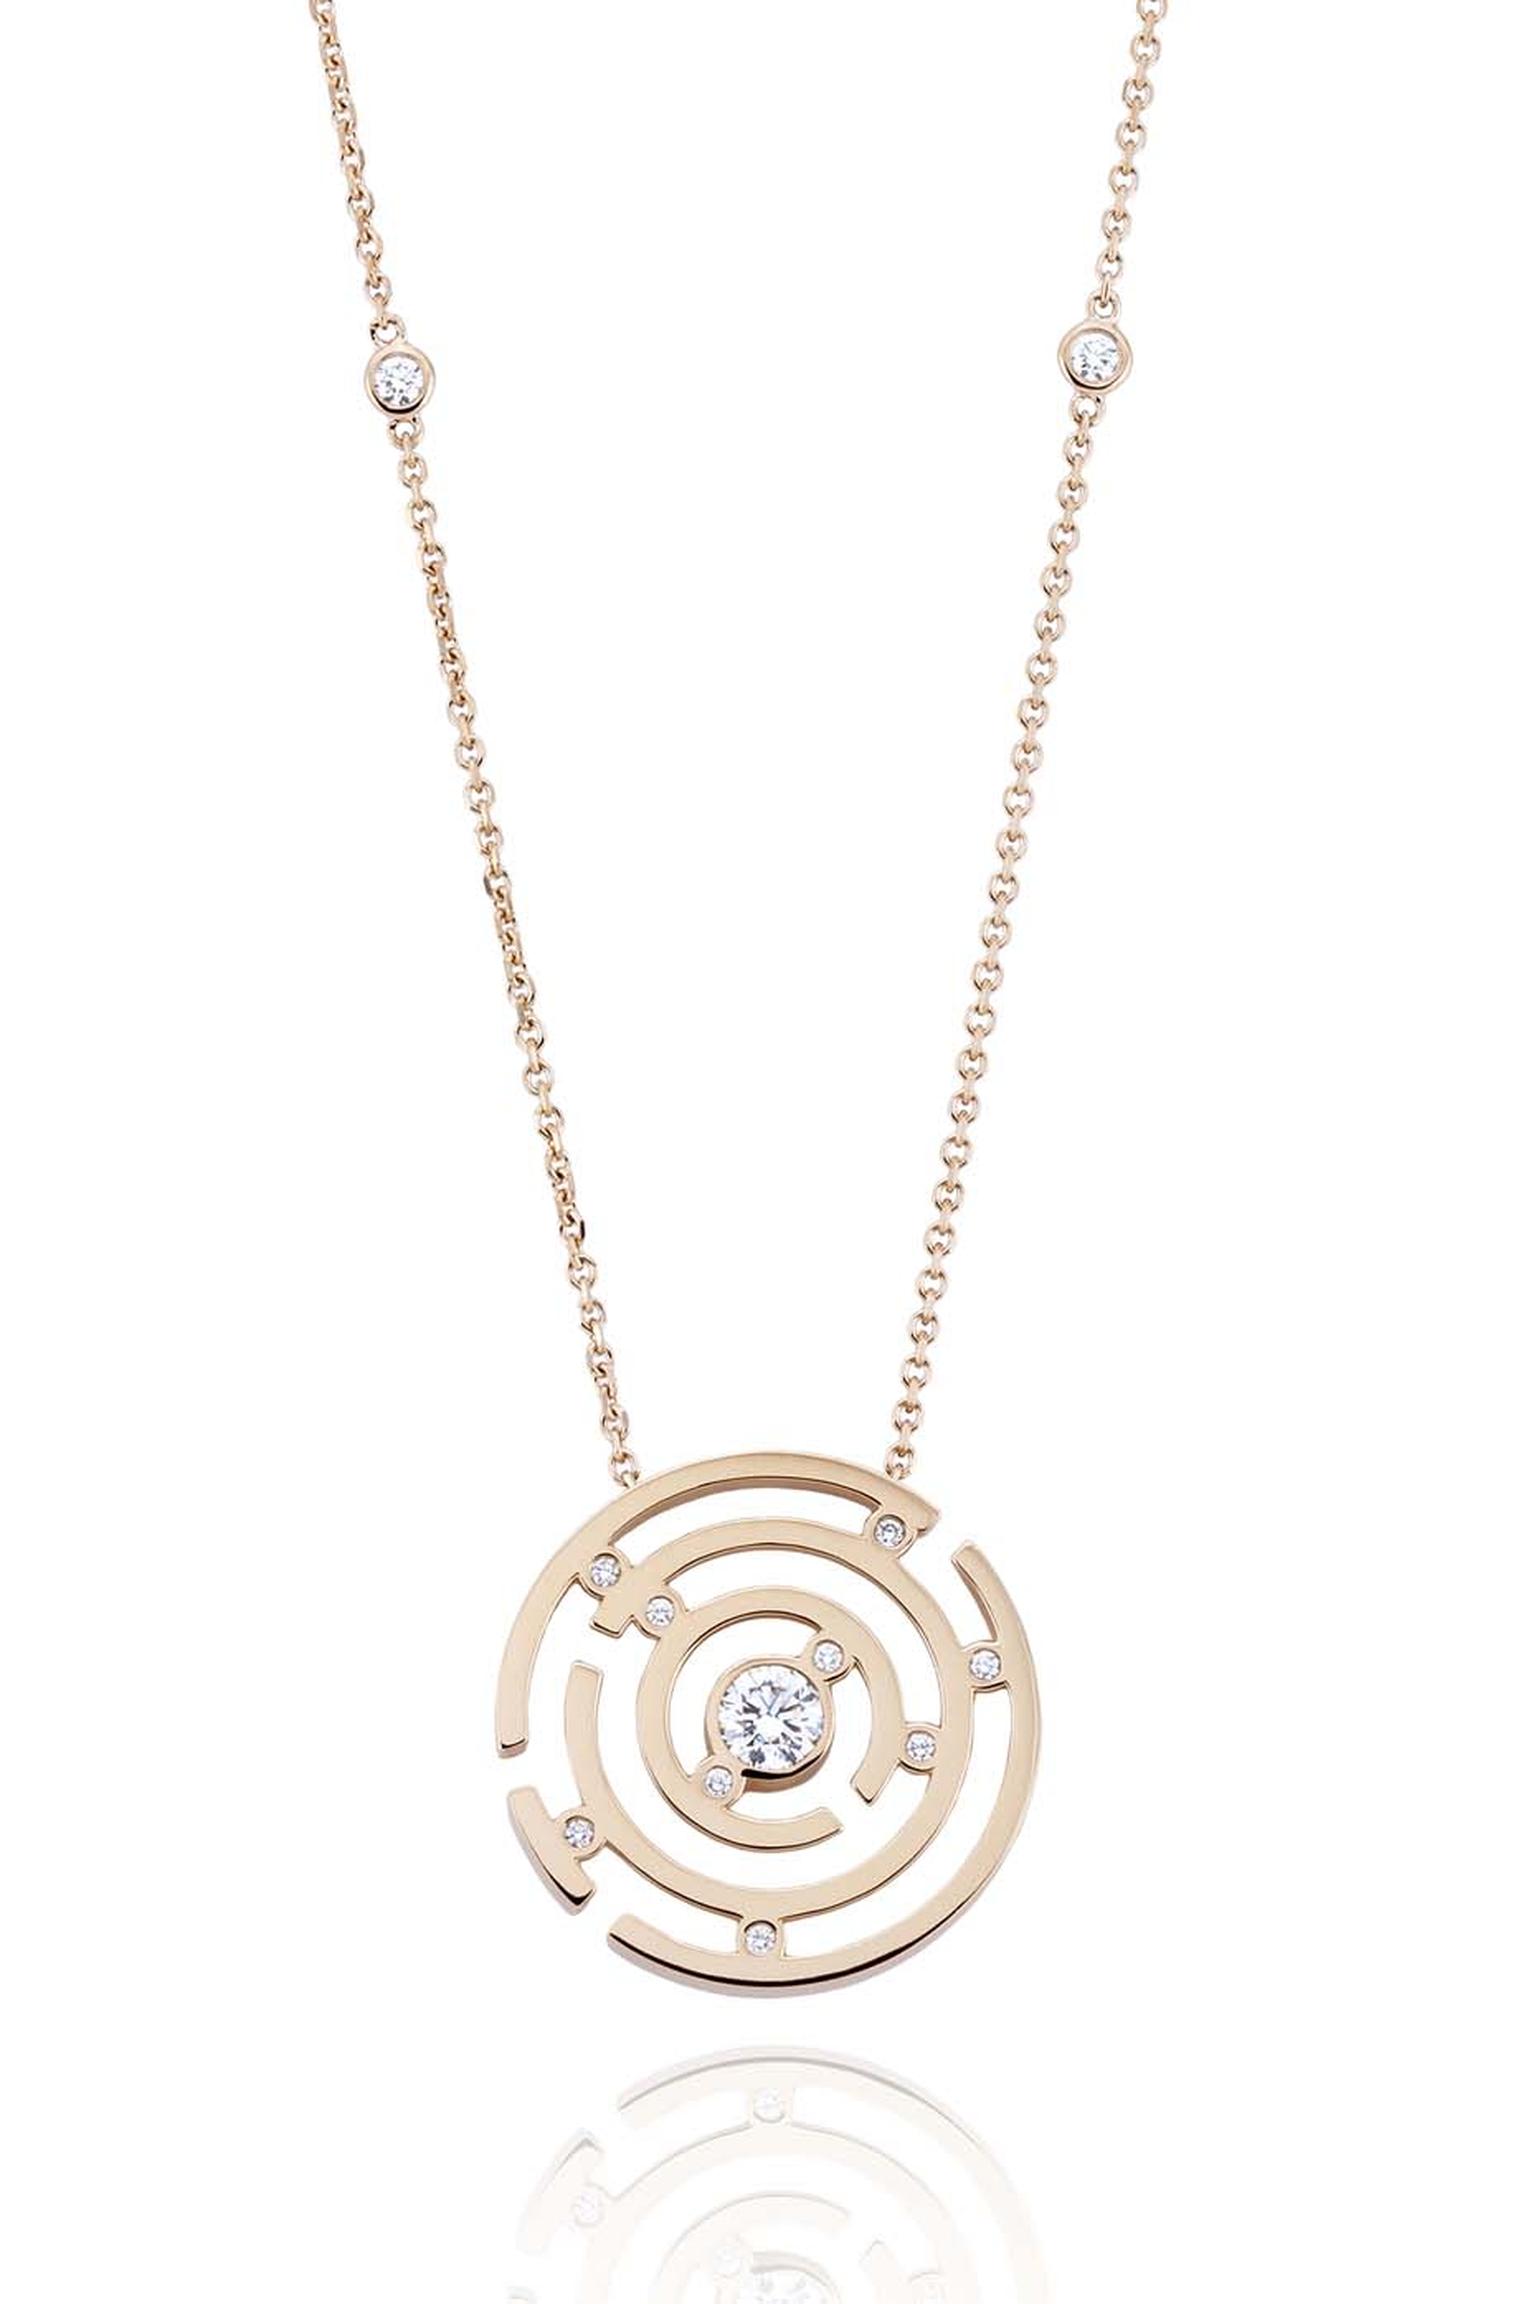 Boodles Maze collection pendant in rose gold.